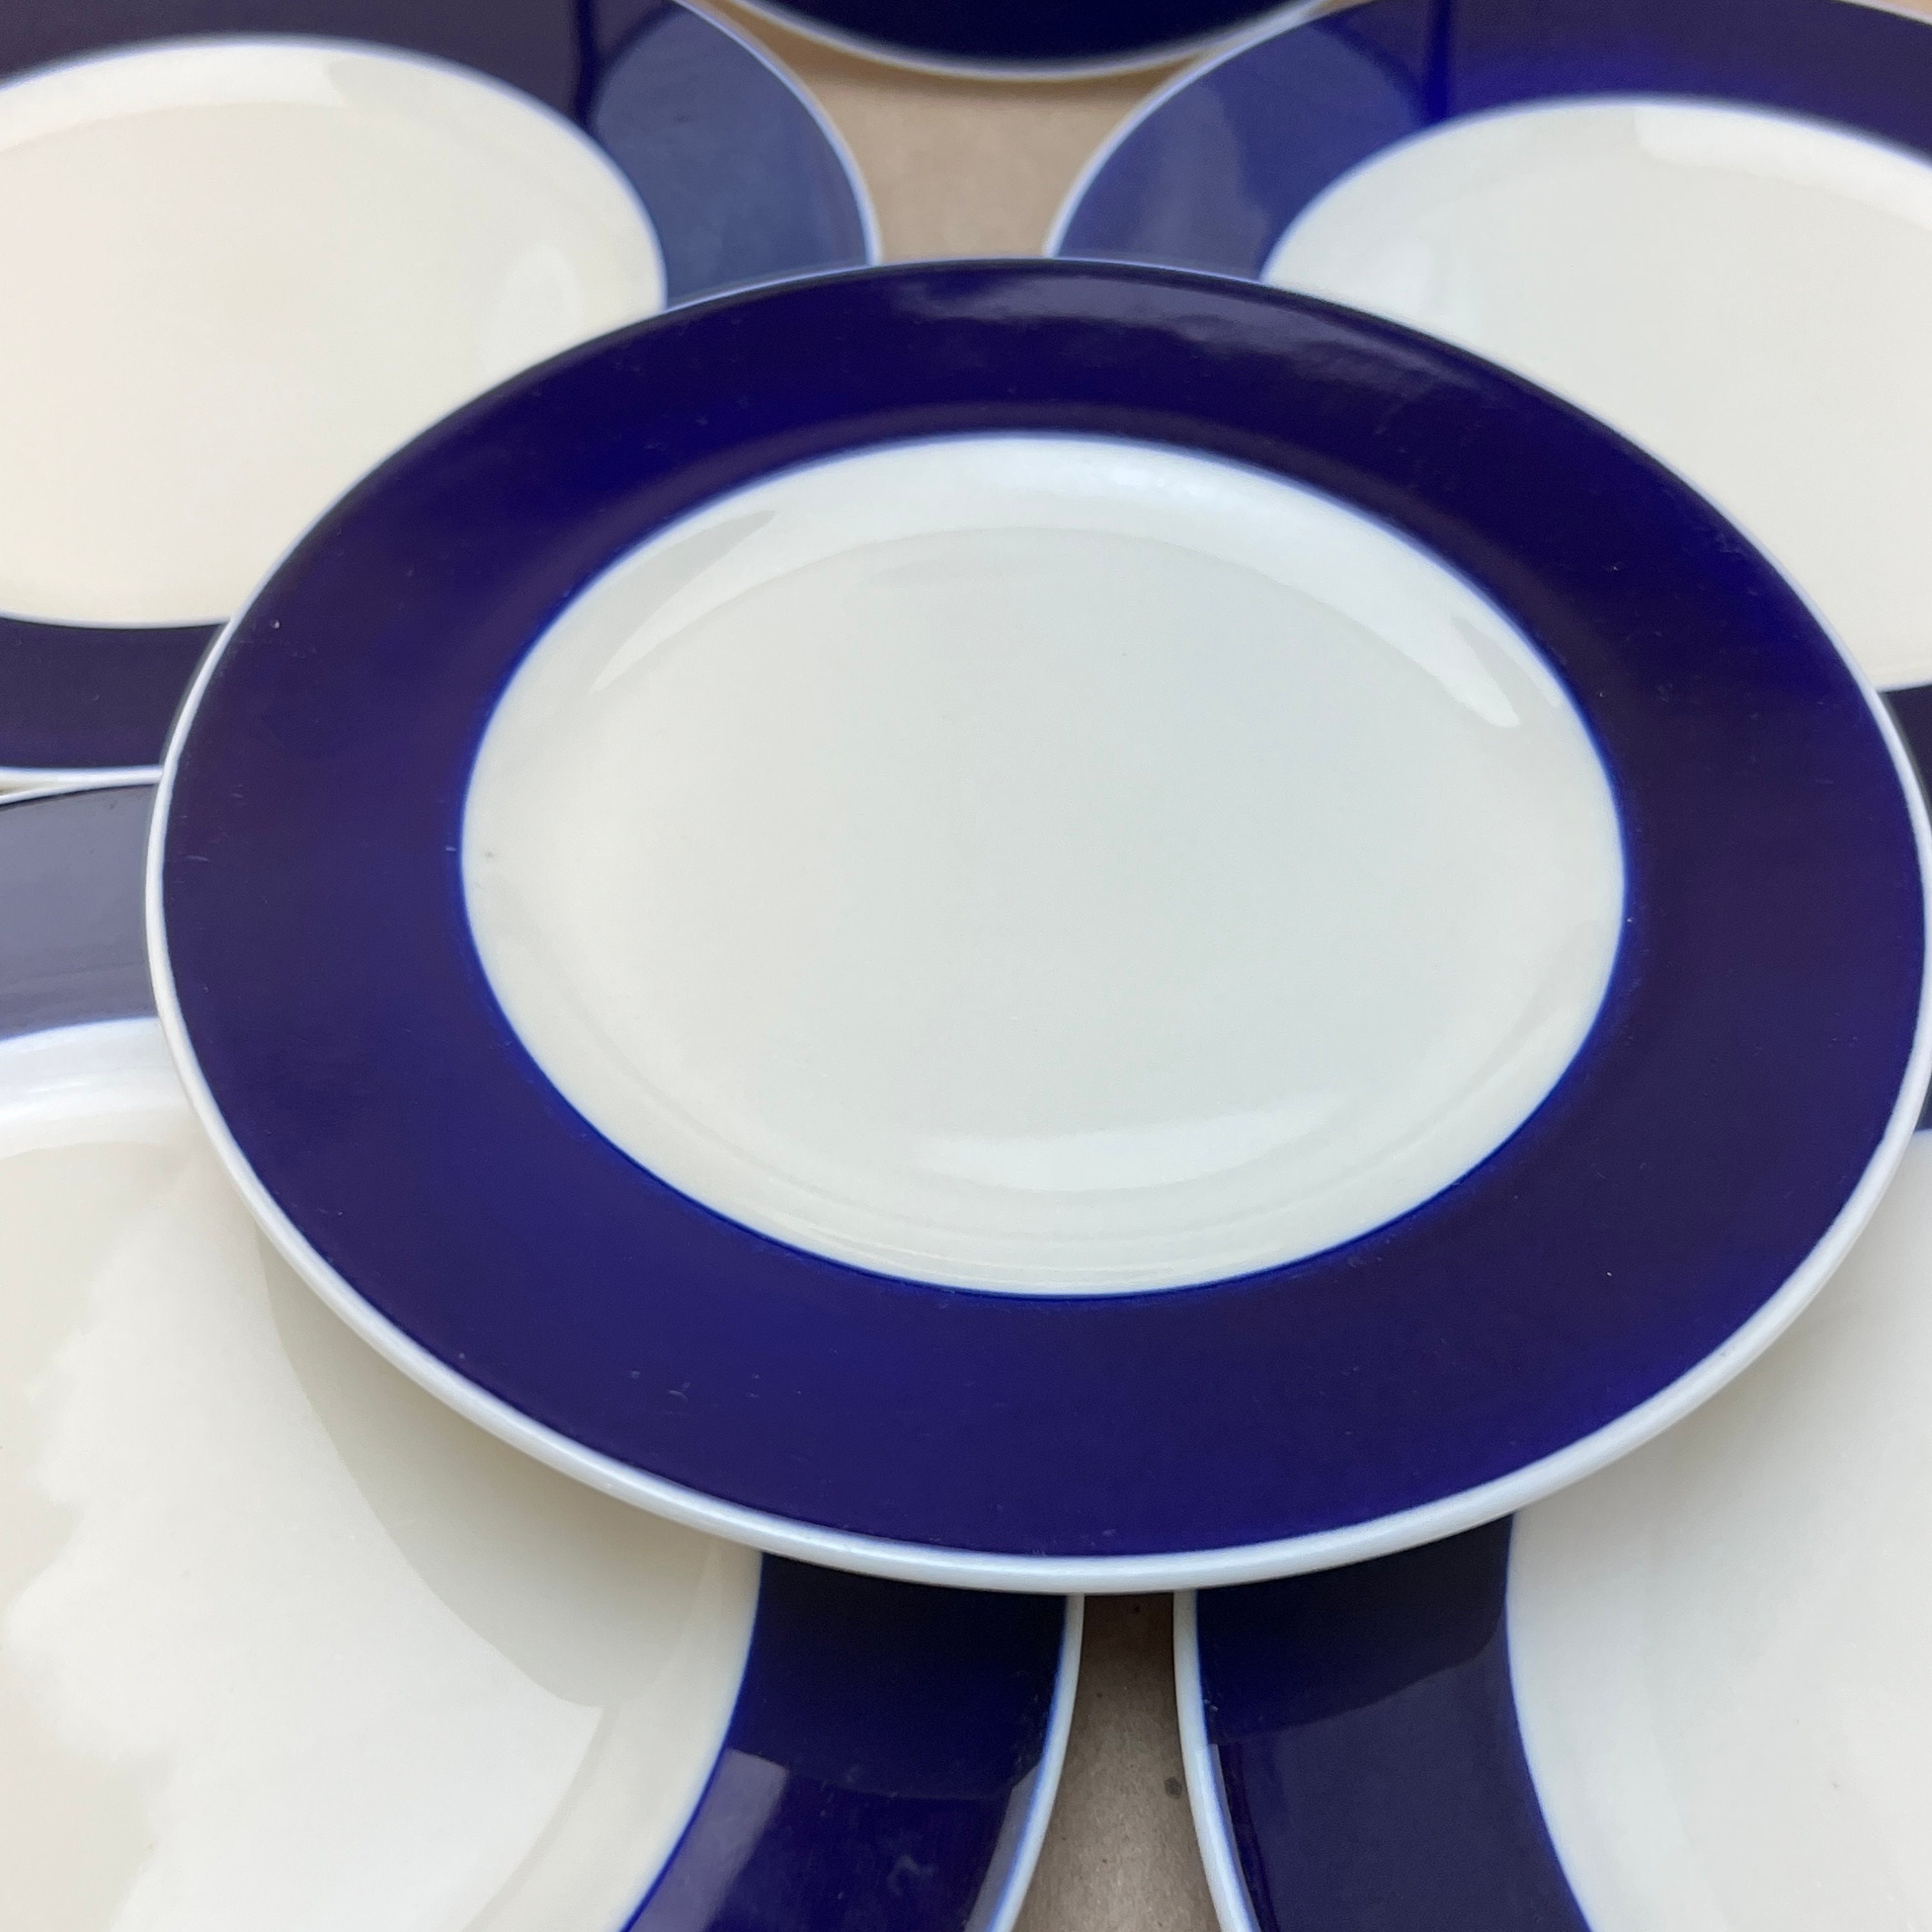 Navy Blue with Gold Dessert Plates - Plastic